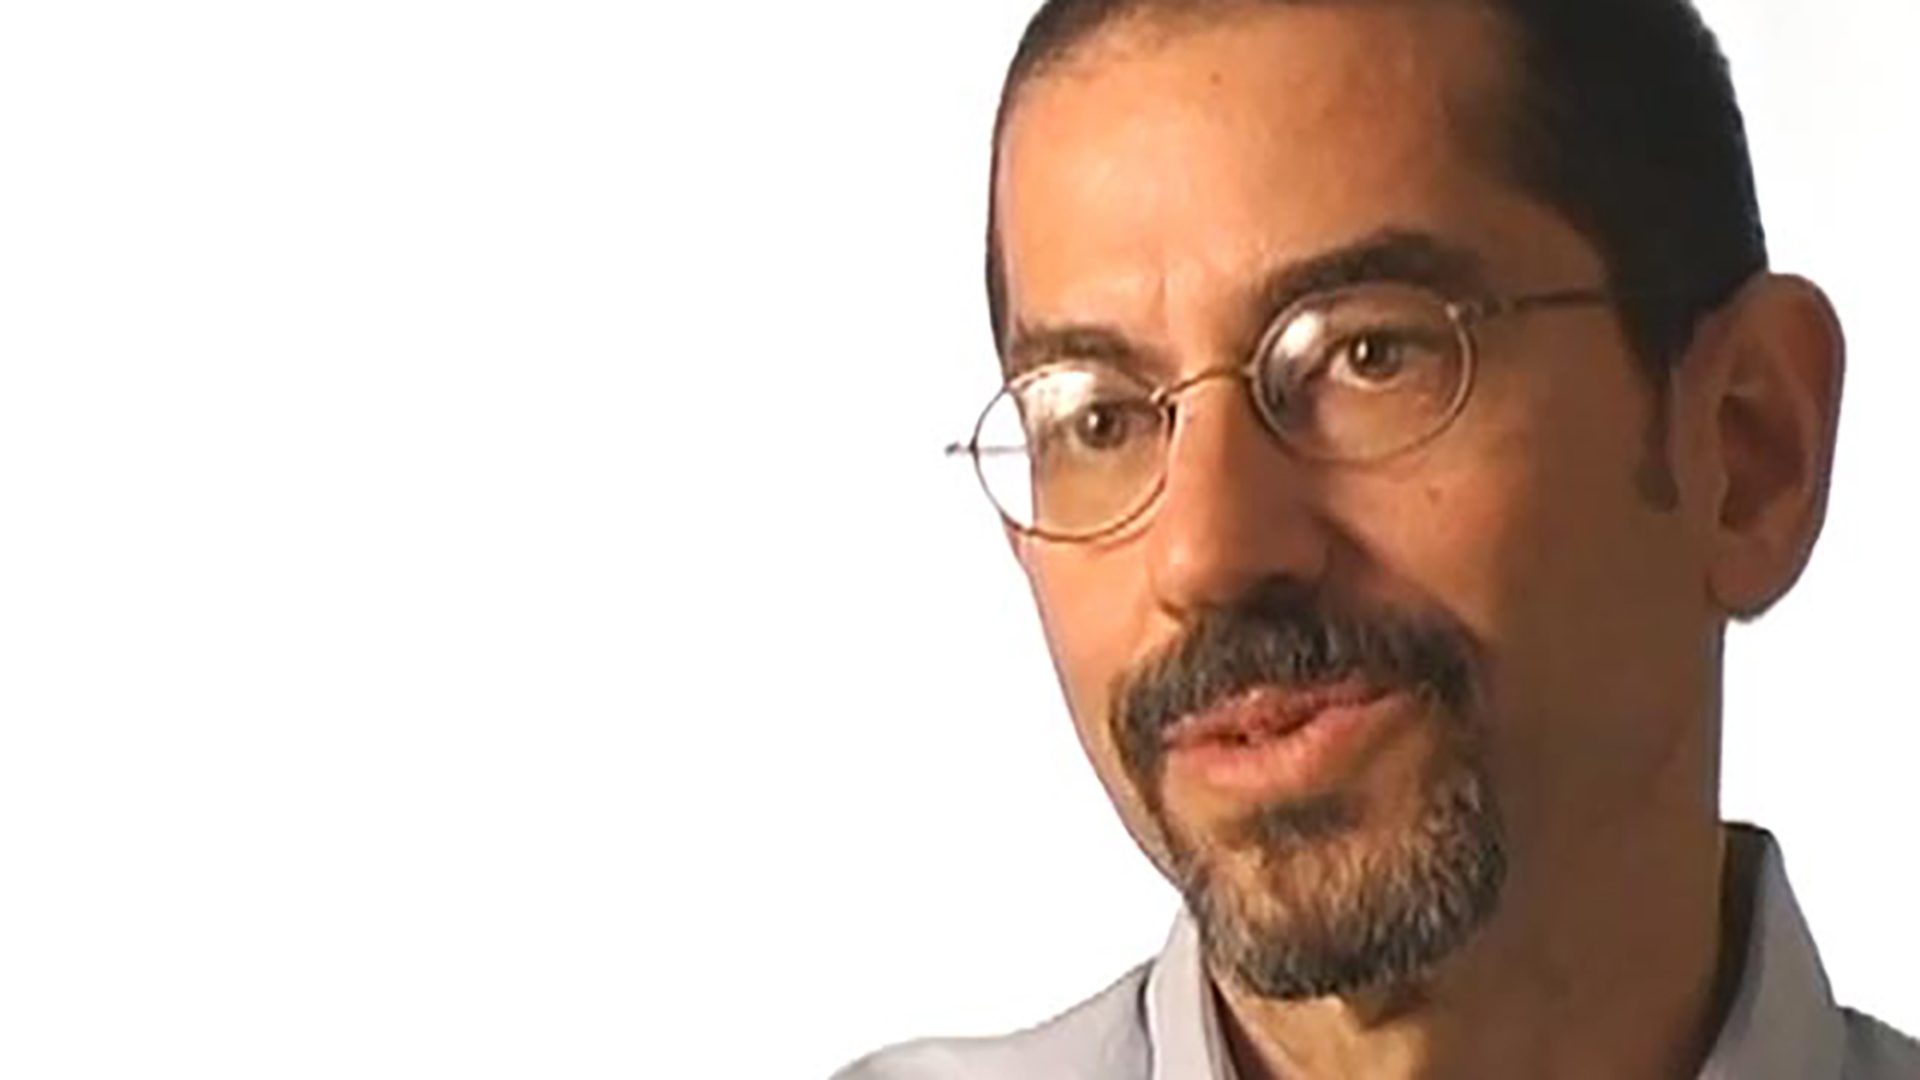 An adult man with a buzz cut hairstyle, facial hair, and glasses is interviewed against a white background.